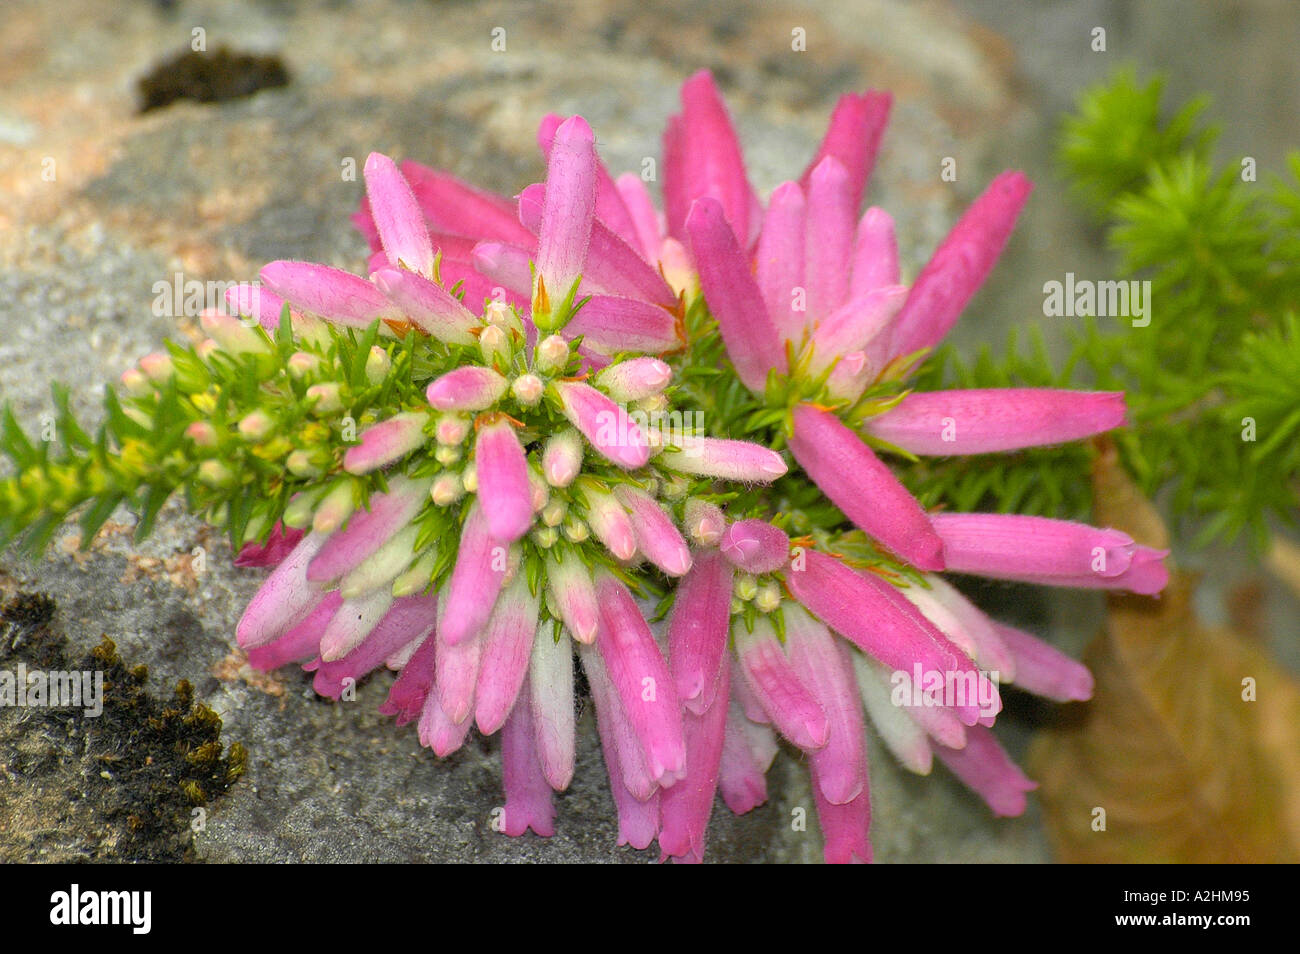 This species which is extinct in the wild, Erica verticillata, was cultivated from specimen in Kew botanical gardens. Stock Photo